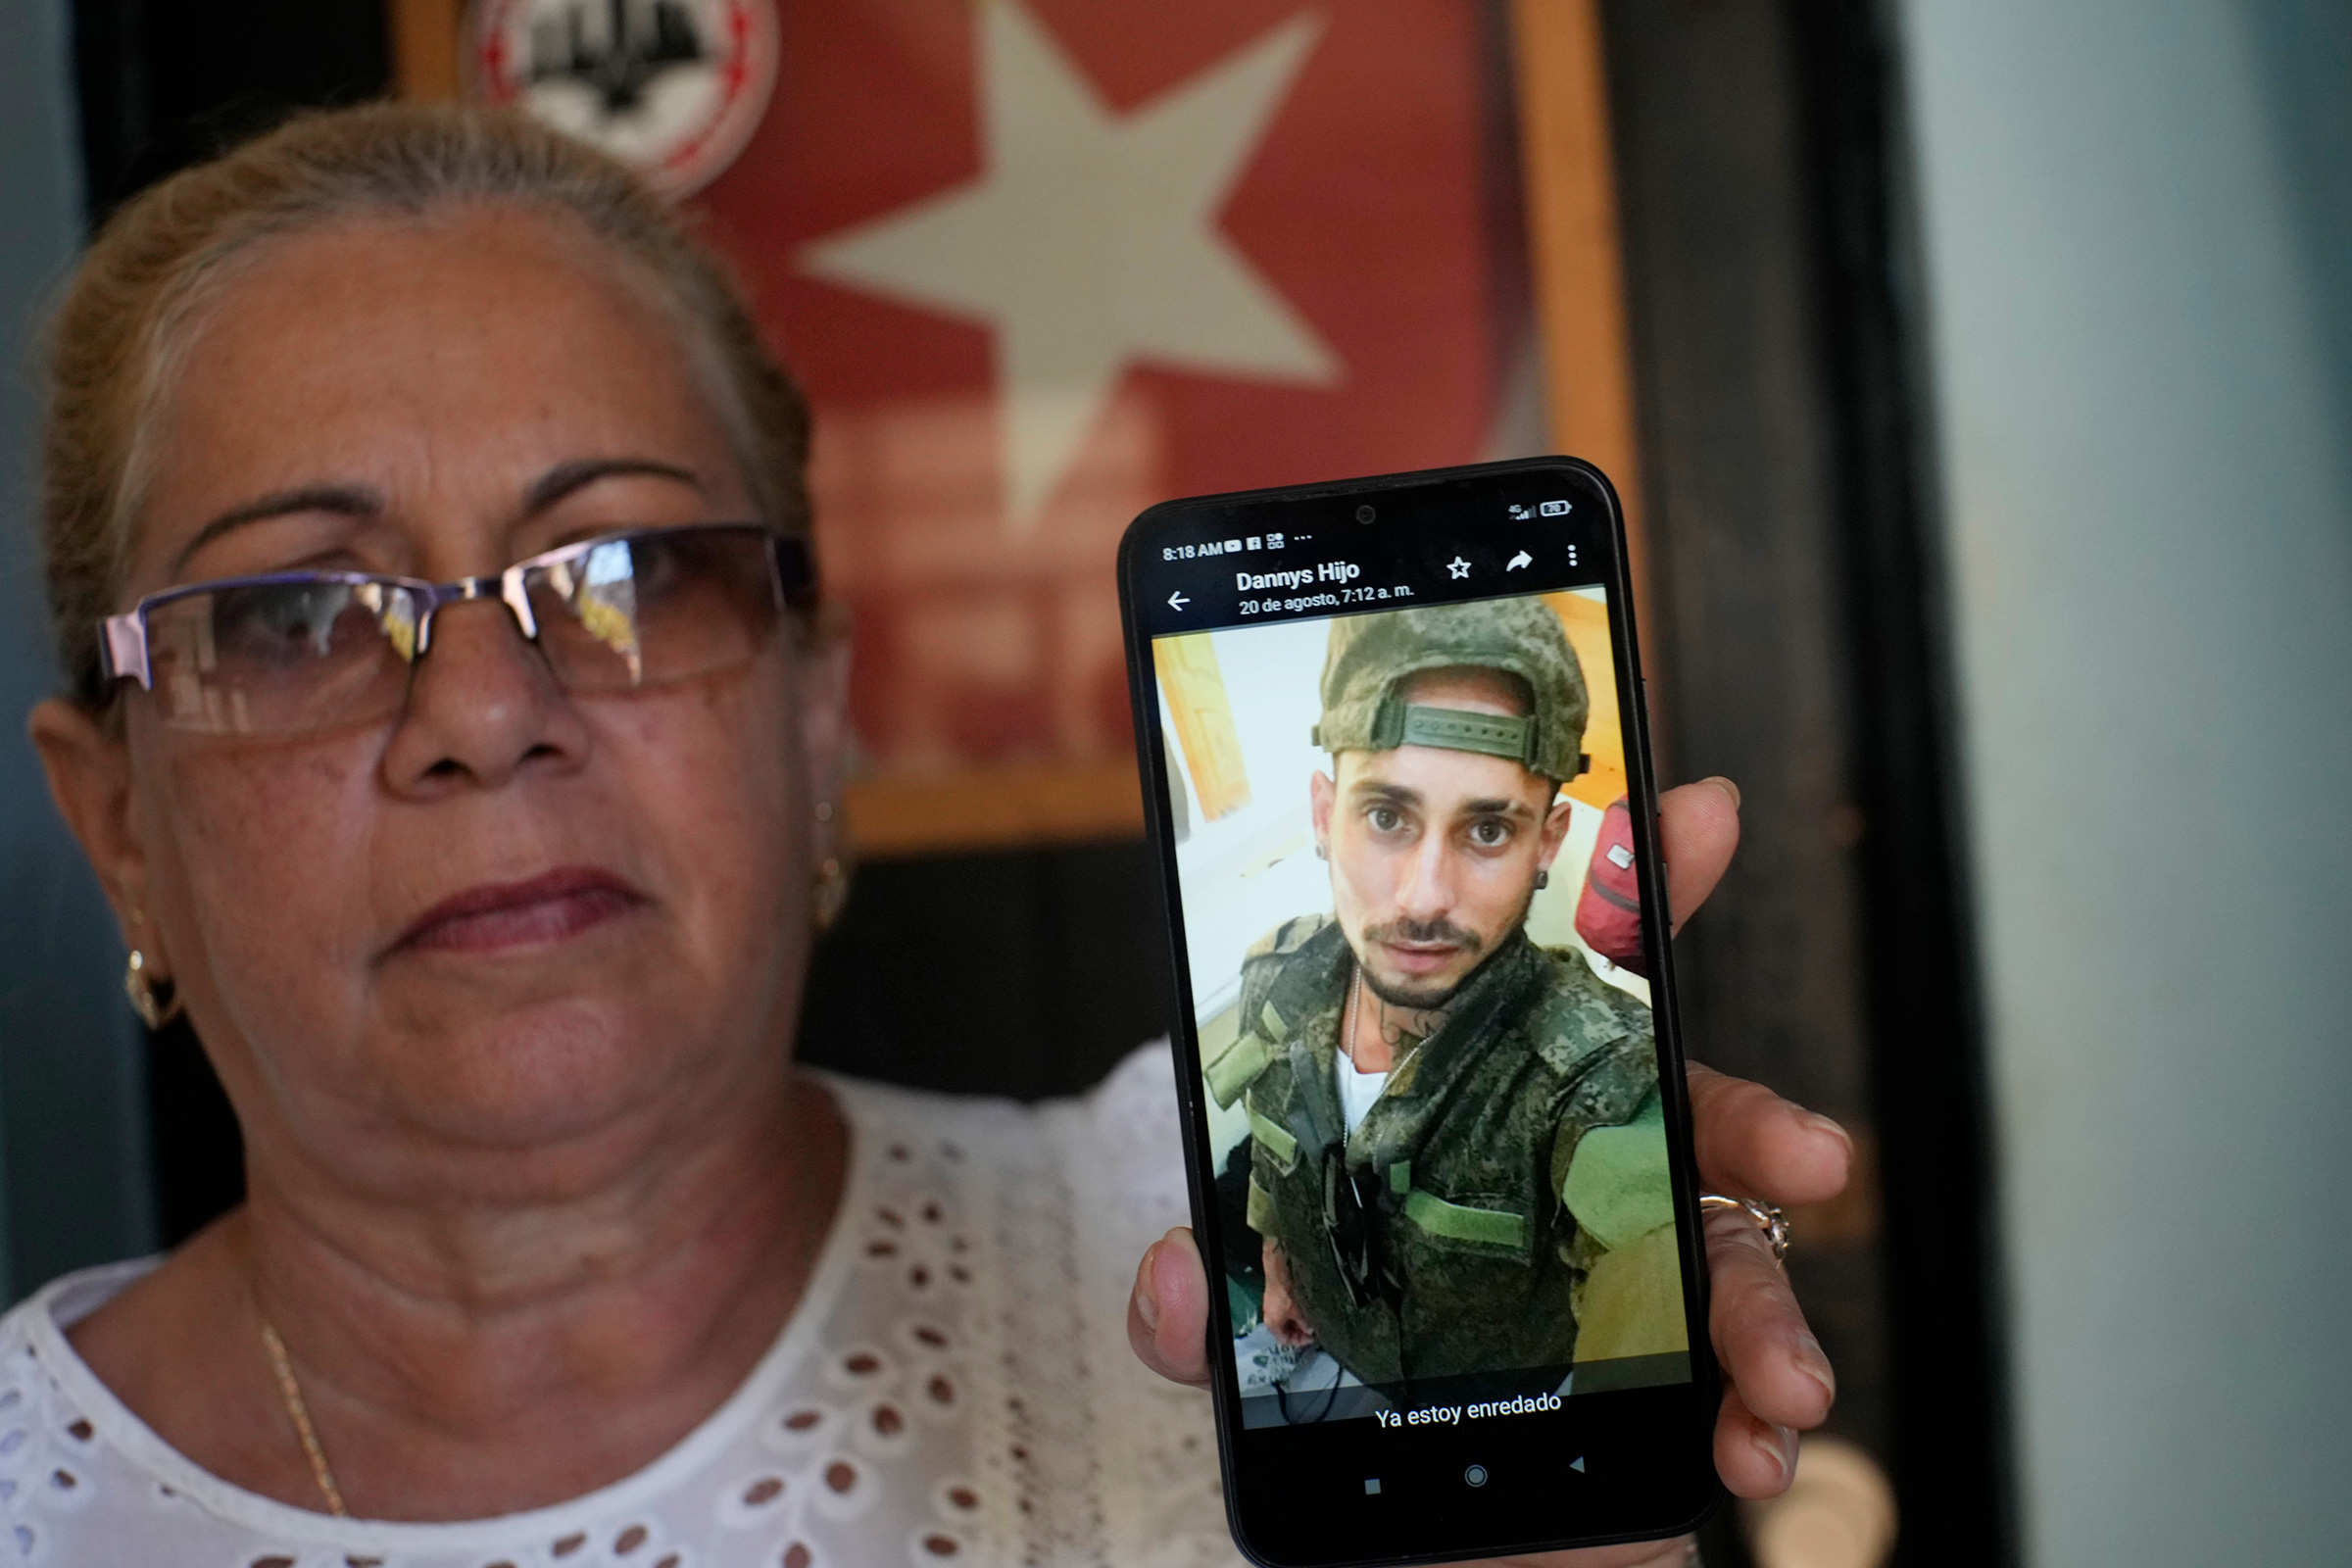 Marilin Vinent holds up a photo of her son Dannys Castillo dressed in military fatigues in an Aug. 22 message from her son that reads in Spanish "I'm already entangled" during an interview at her home in Havana, Cuba, Friday, Sept. 8, 2023. Vinent said that her son and other Cubans traveled at the end of July to Russia after being promised work in a construction job, but that he was one of the Cubans recruited to fight for Russia in Ukraine.  (Ramon Espinosa—AP)